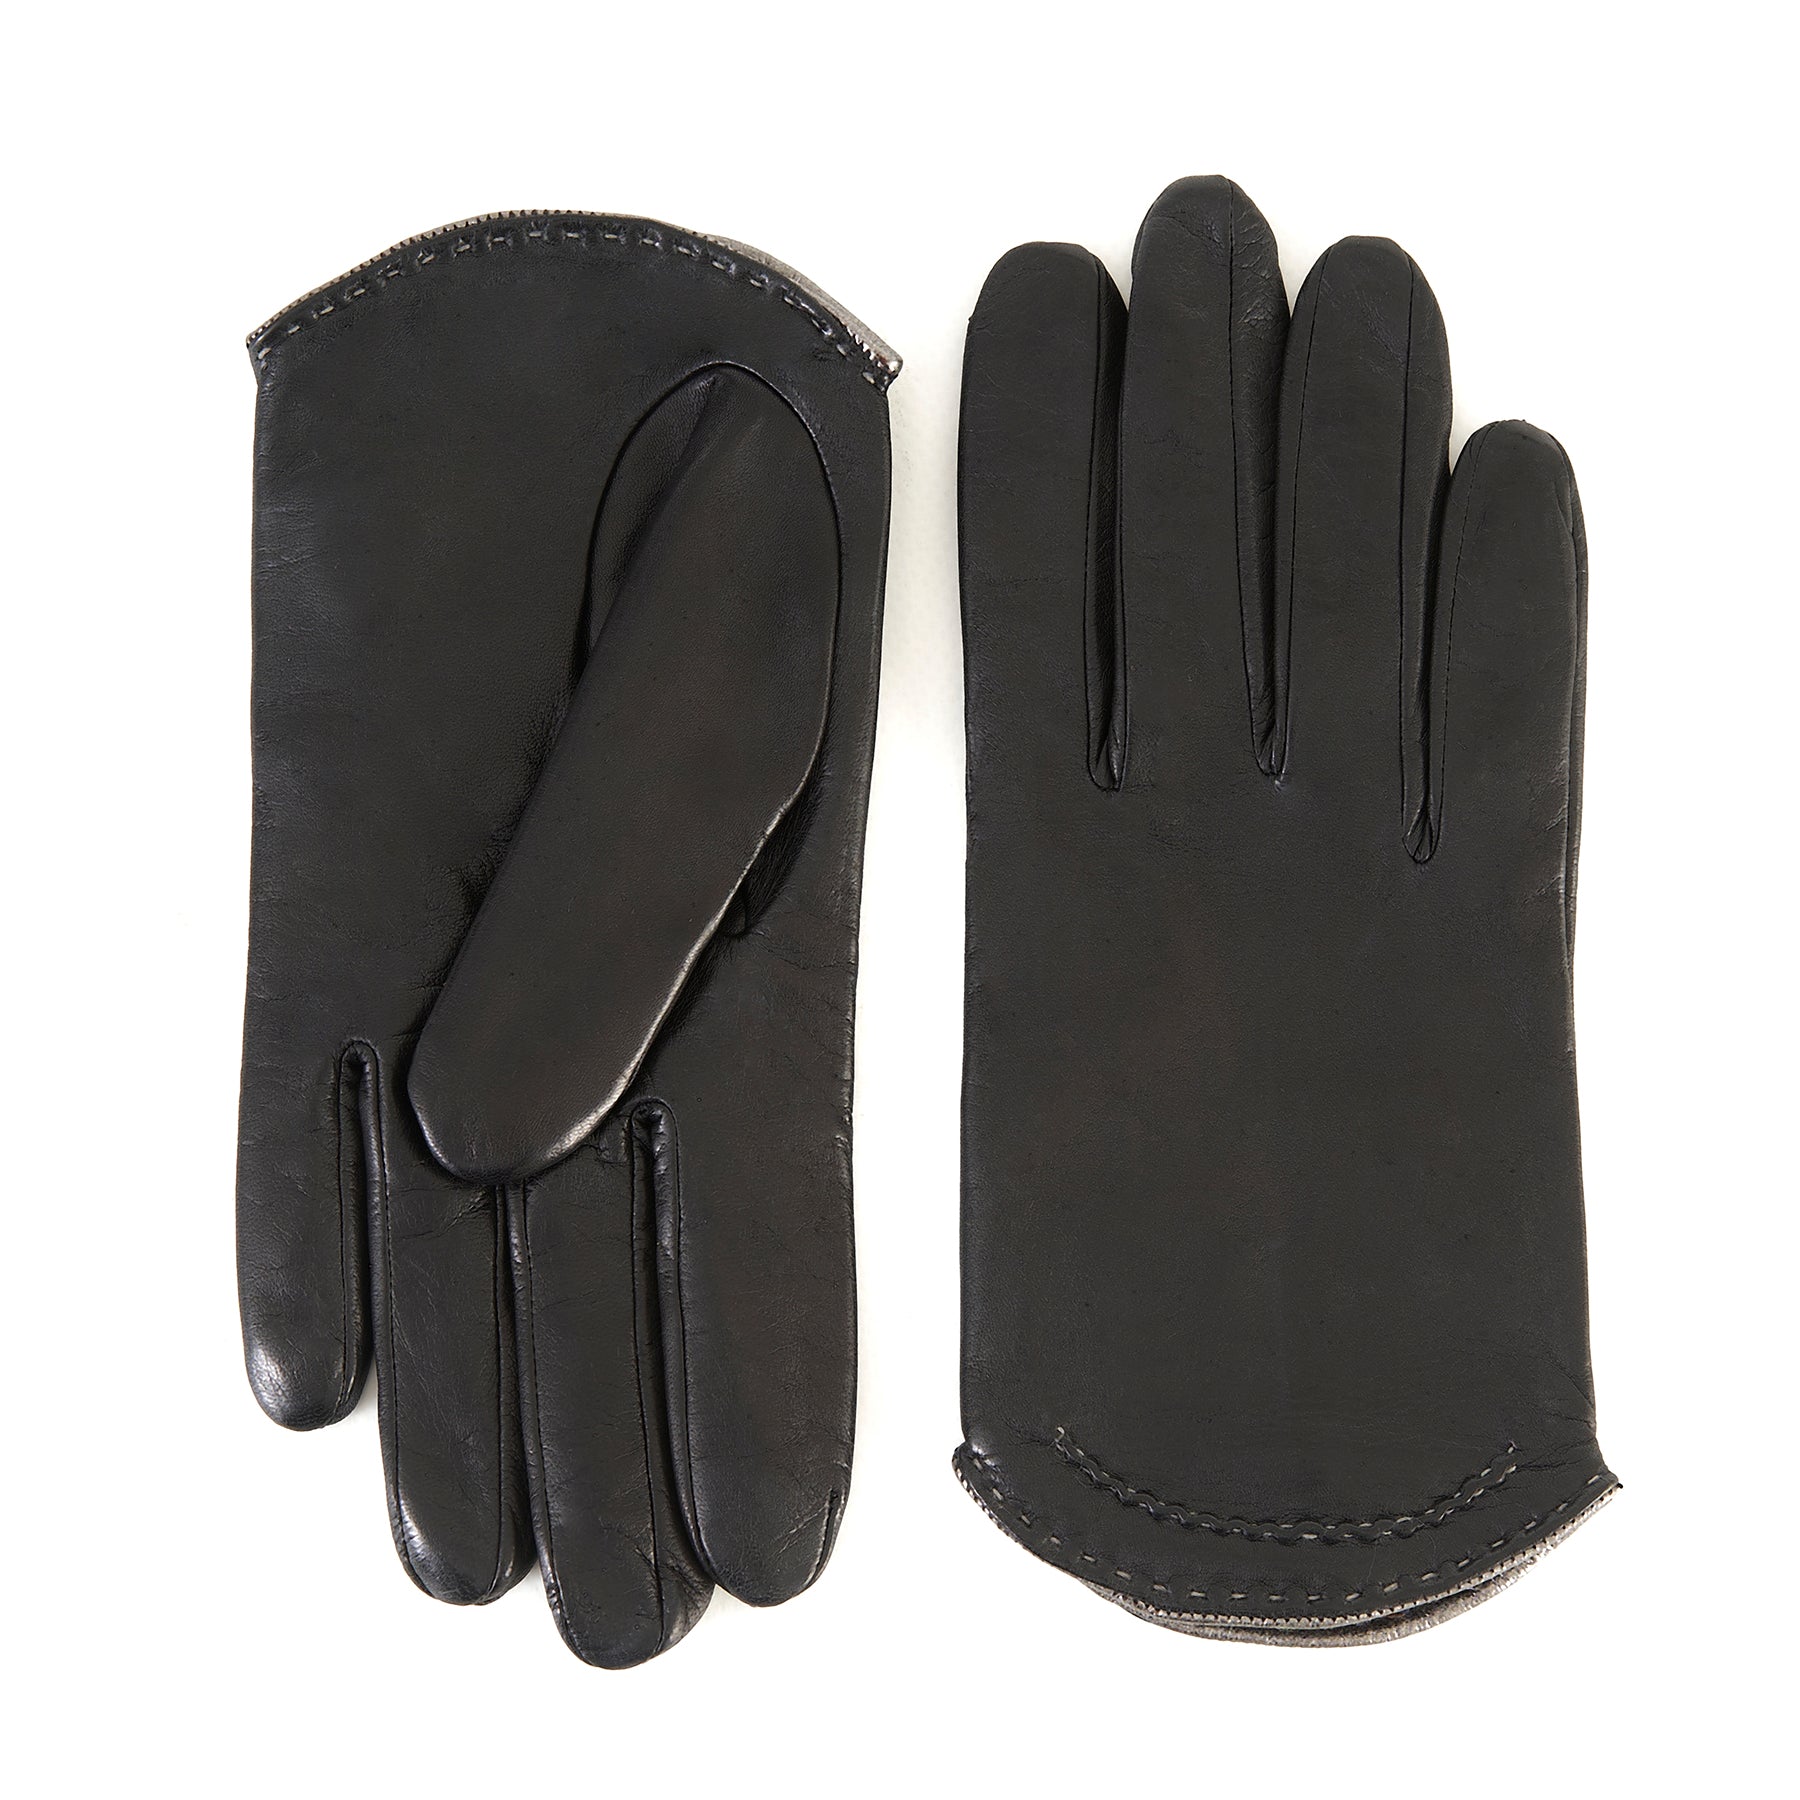 Women's black nappa leather gloves with metallic leather edge silk lined